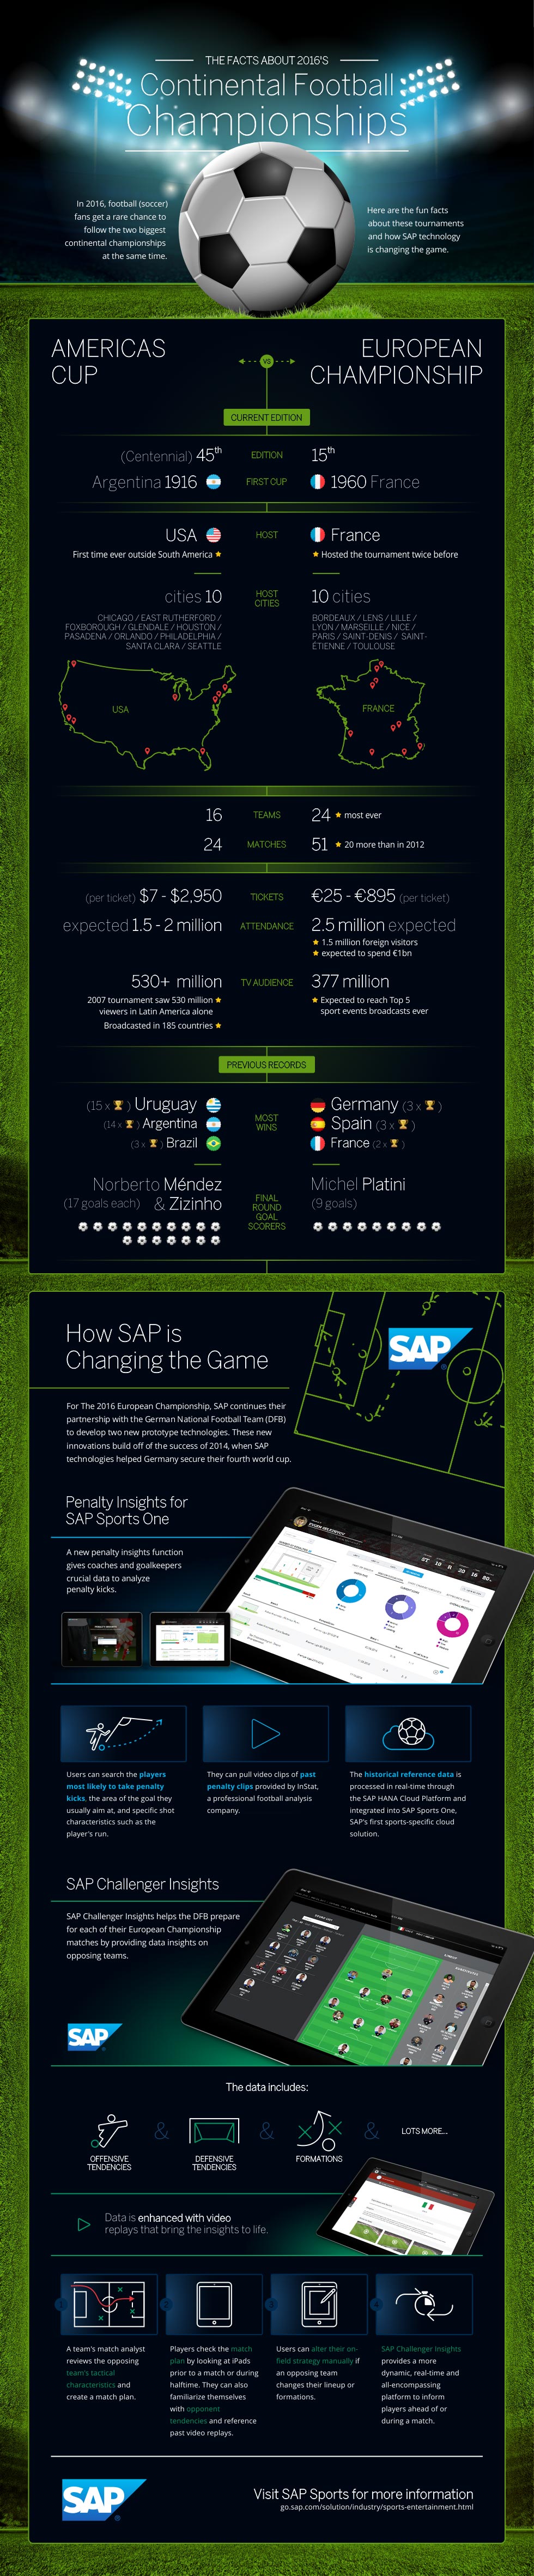 SAP Infographic: 2016 Continental Football Championships